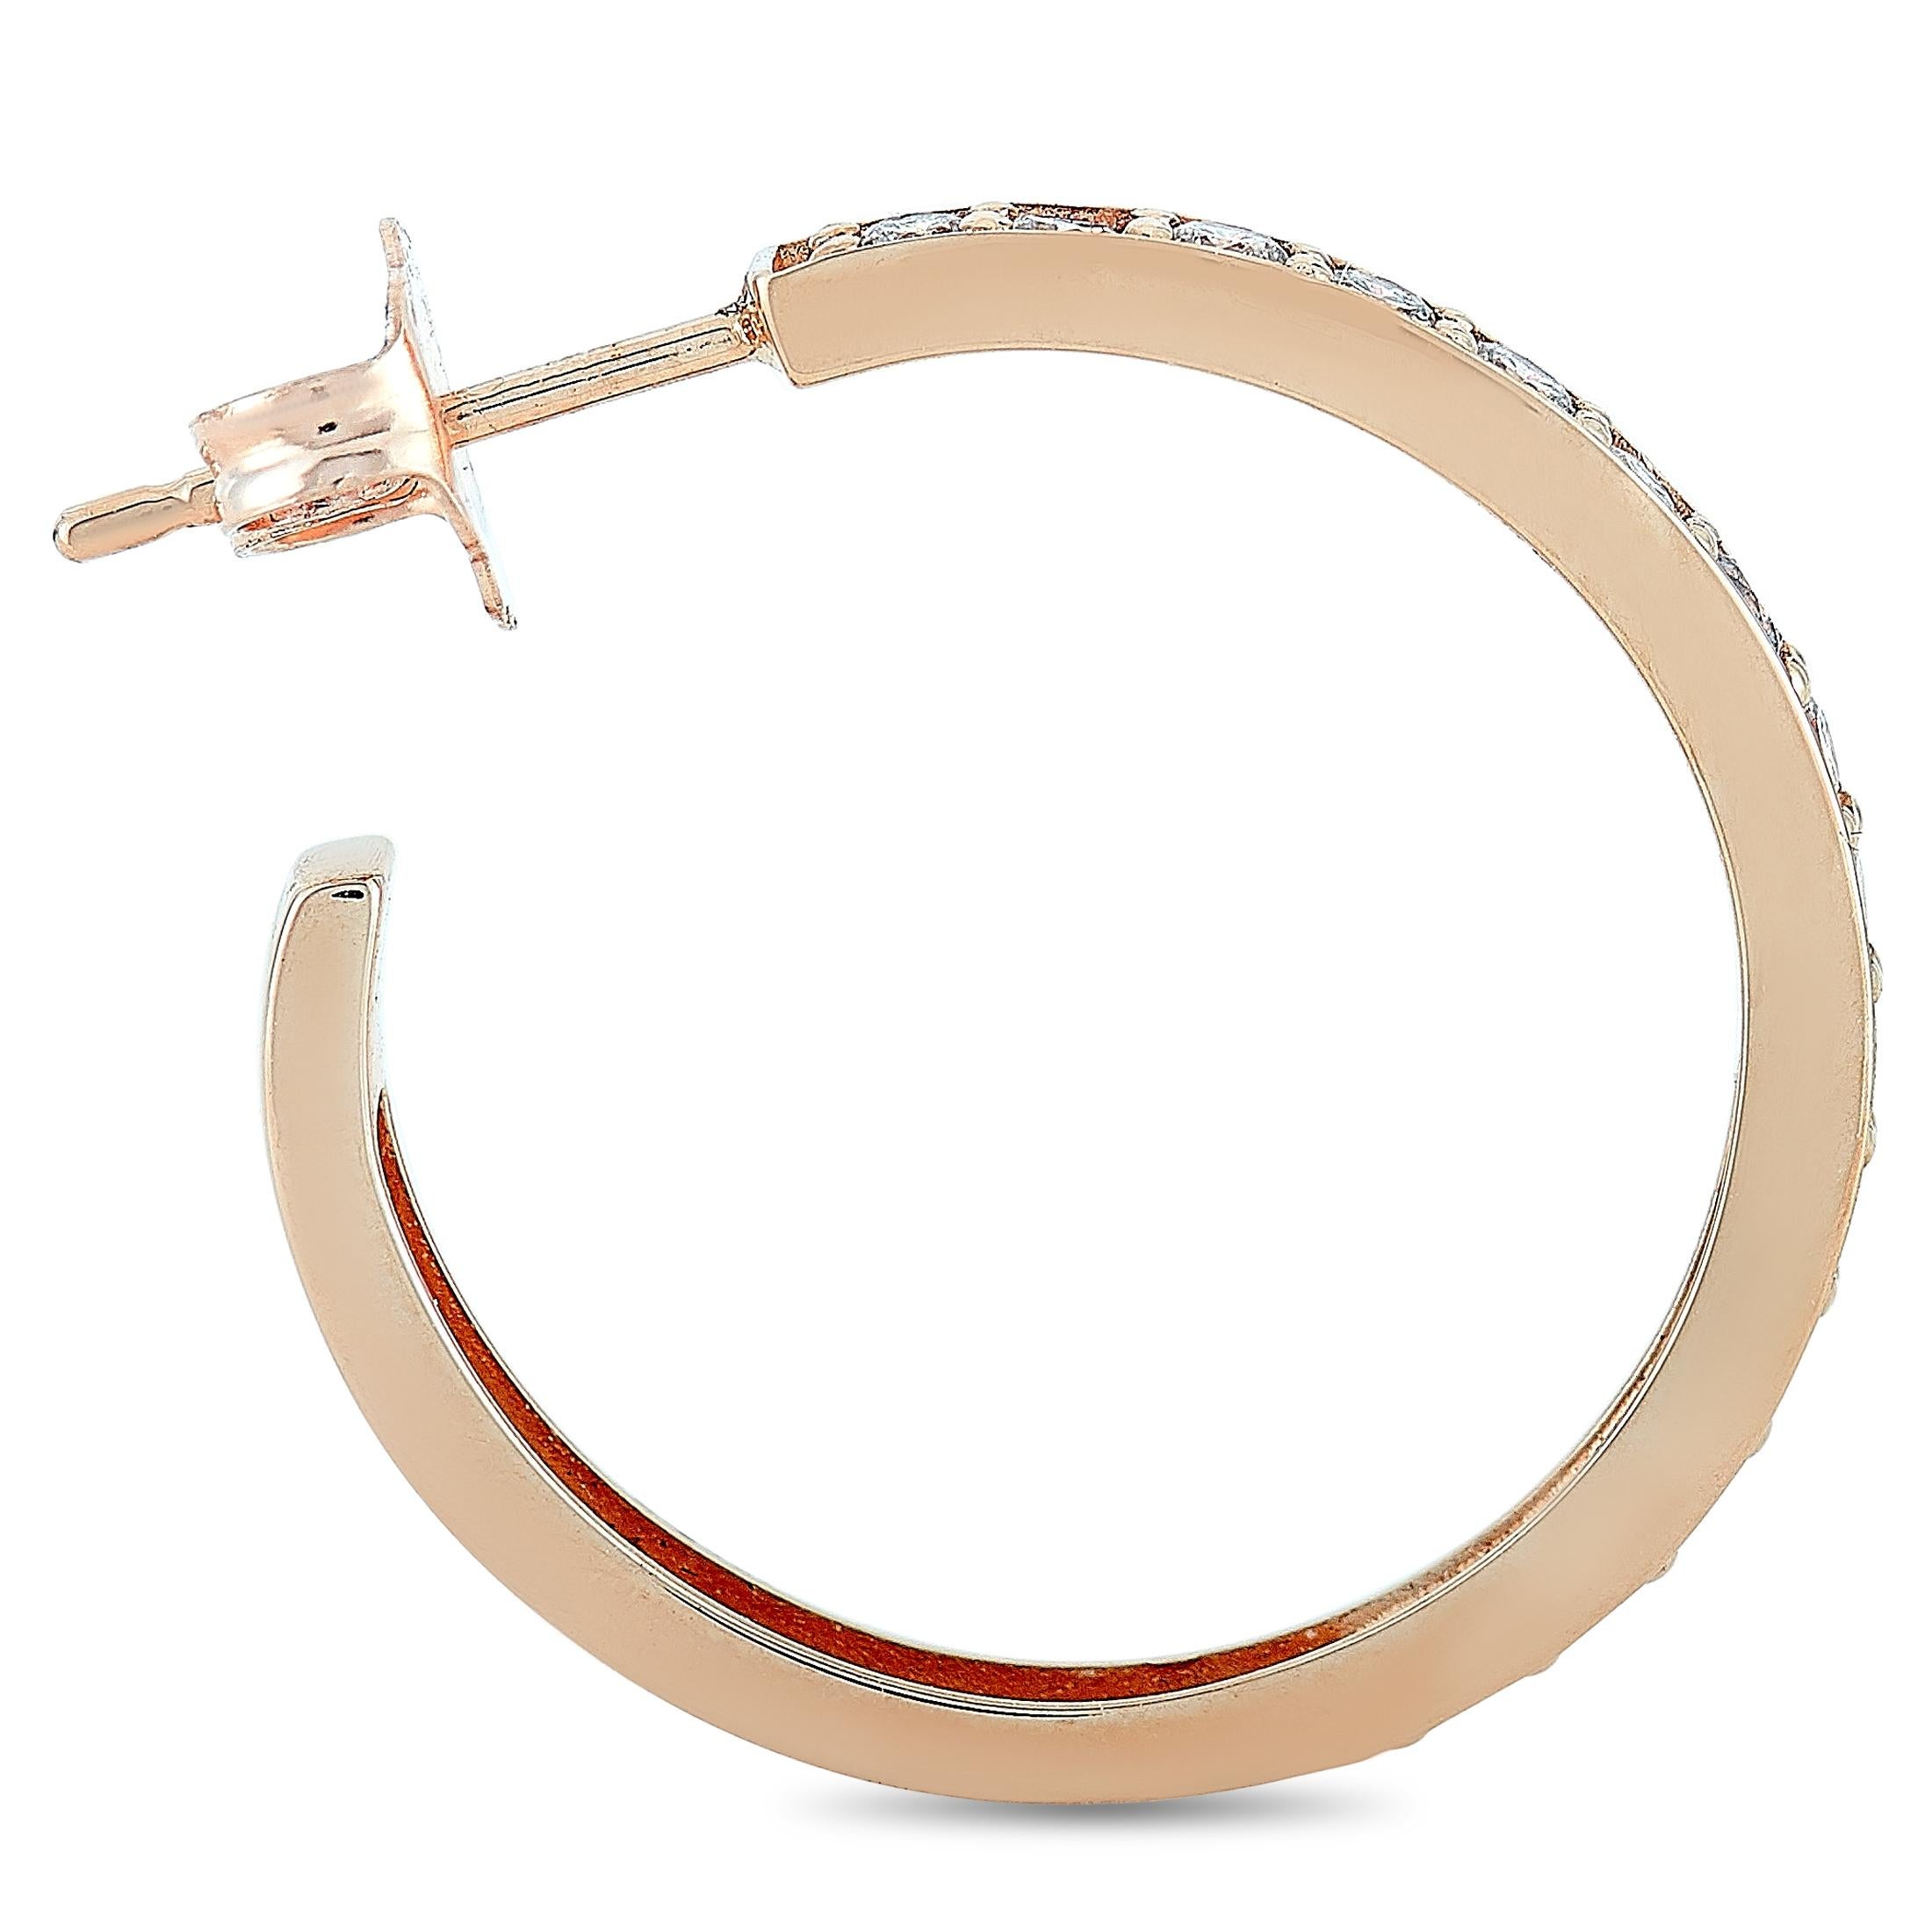 These LB Exclusive hoop earrings are made of 14K rose gold and each of the two weighs 1.65 grams. They measure 0.75” in height and boast a 0.75” hoop diameter. The pair is embellished with diamonds that amount to 0.75 carats.
 
 The earrings are